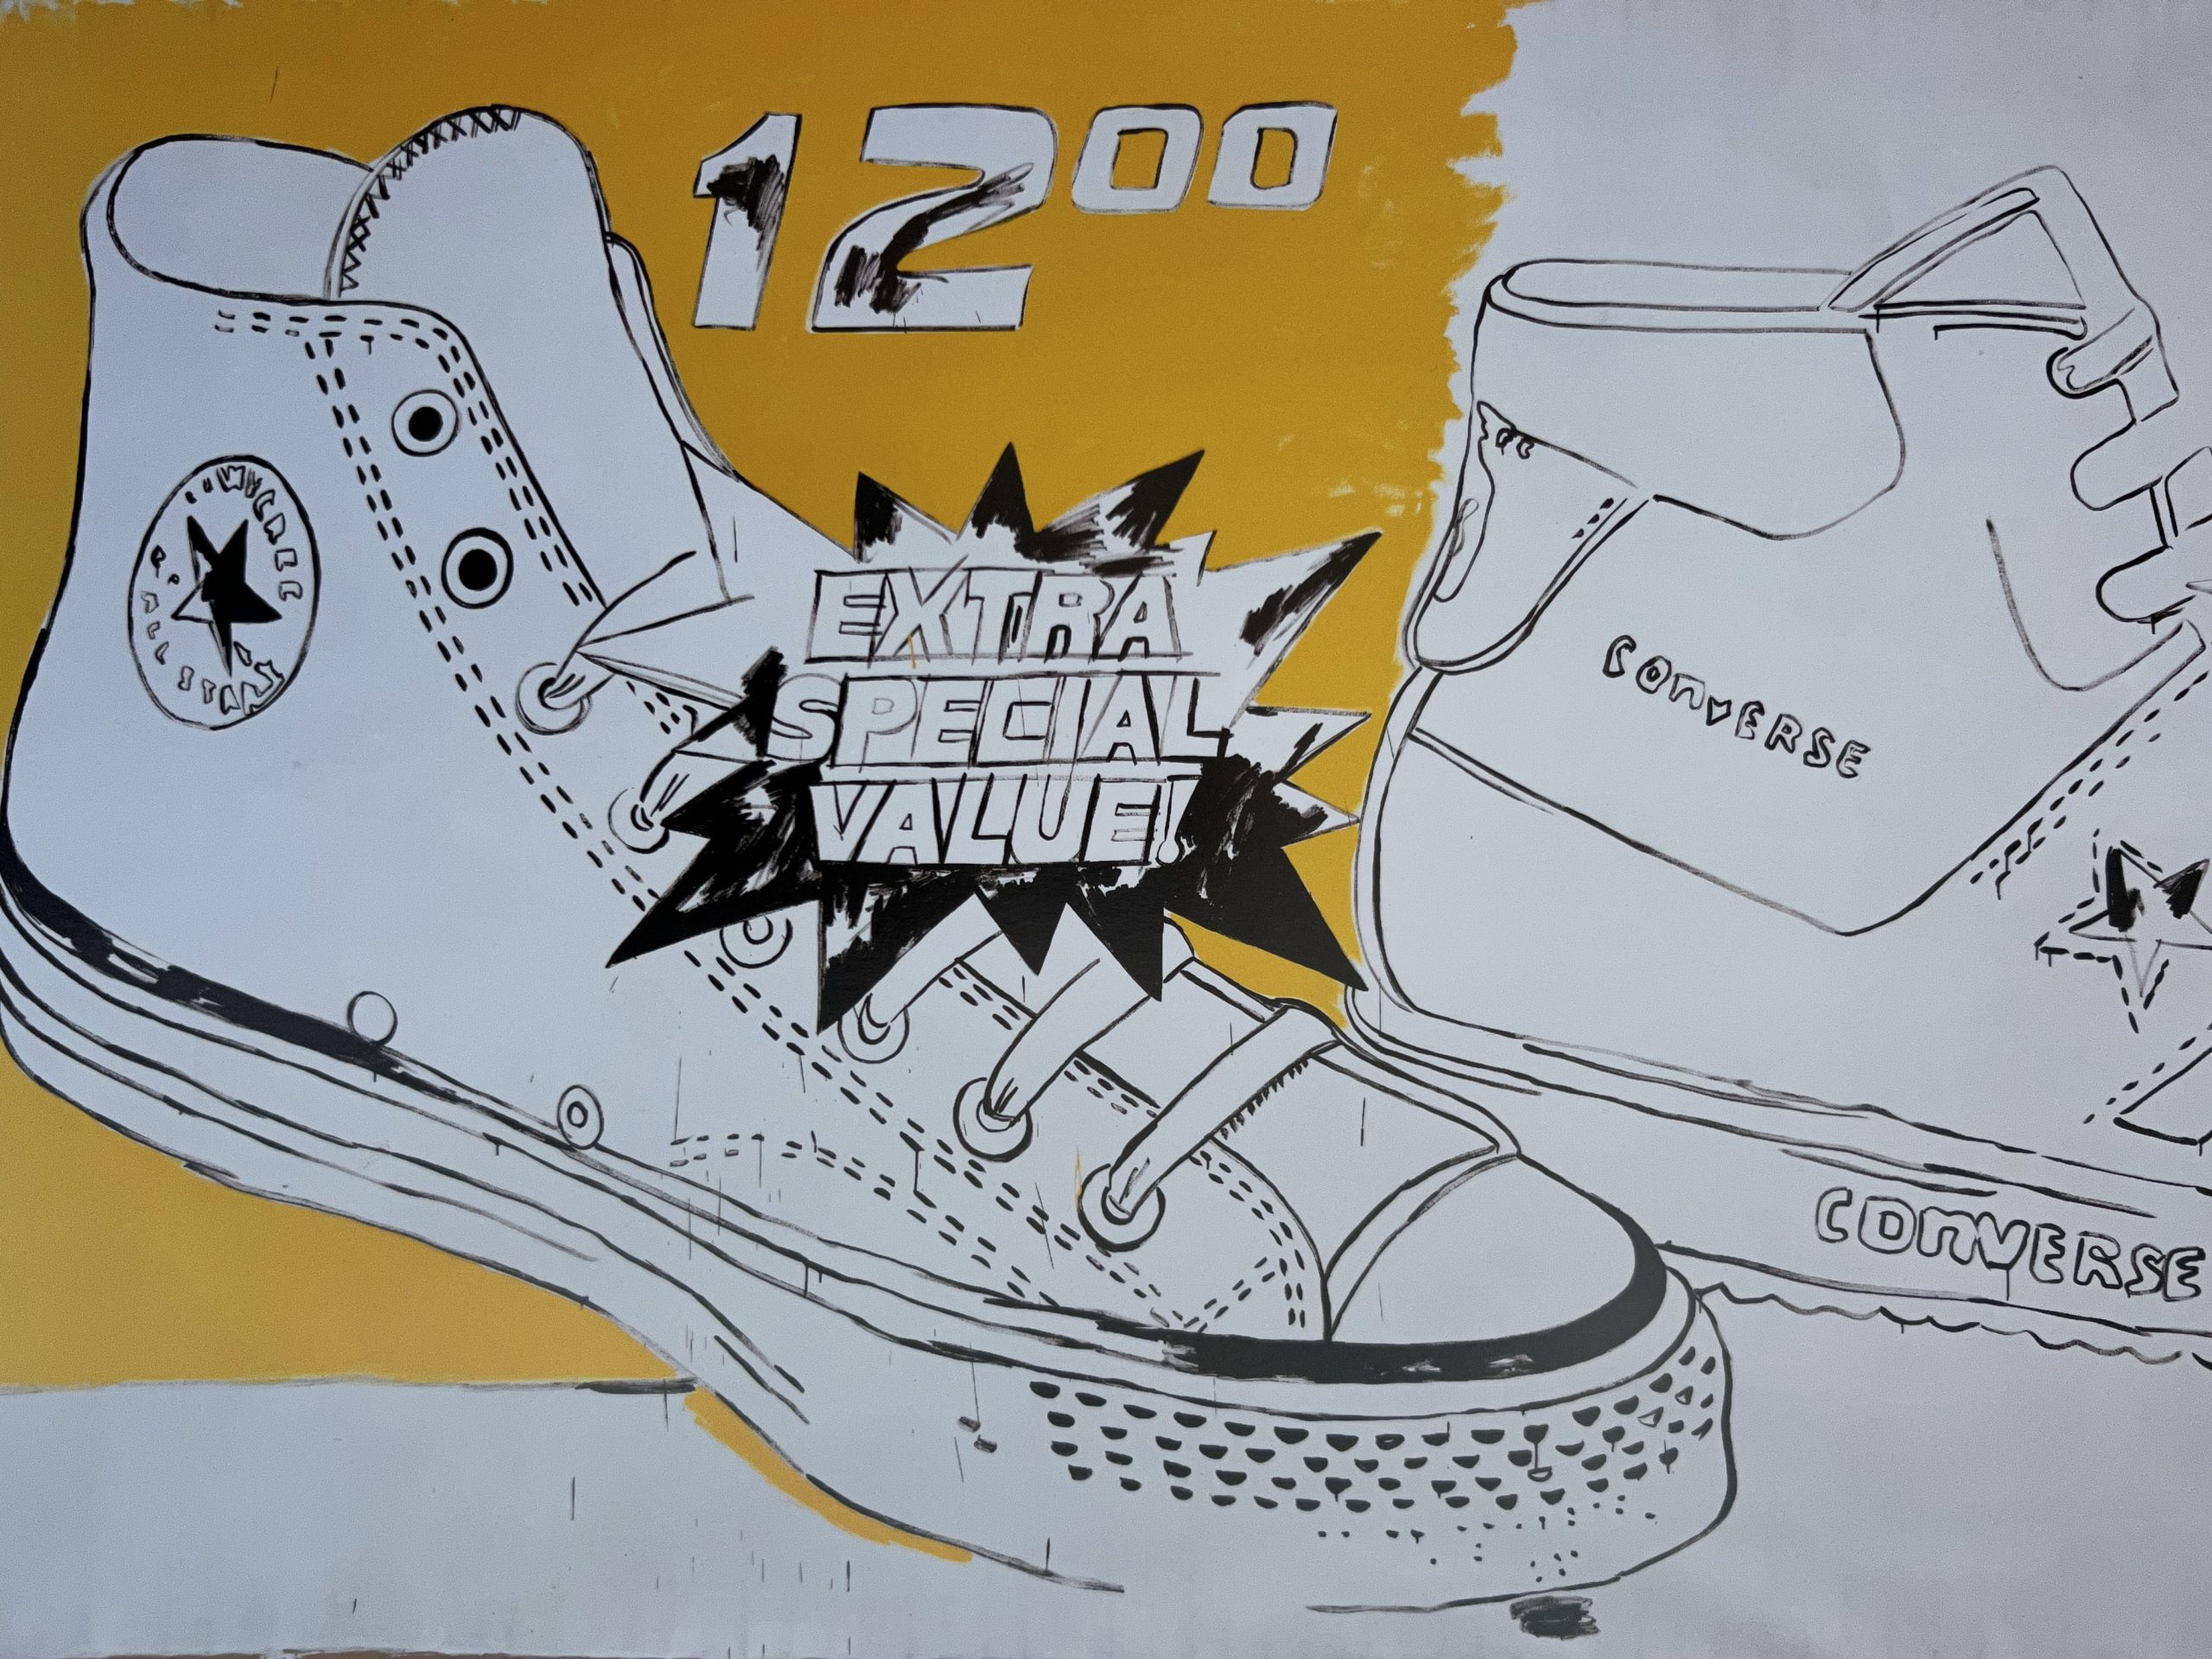 Andy Warhol Late Paintings Original 1992 Poster FT Converse